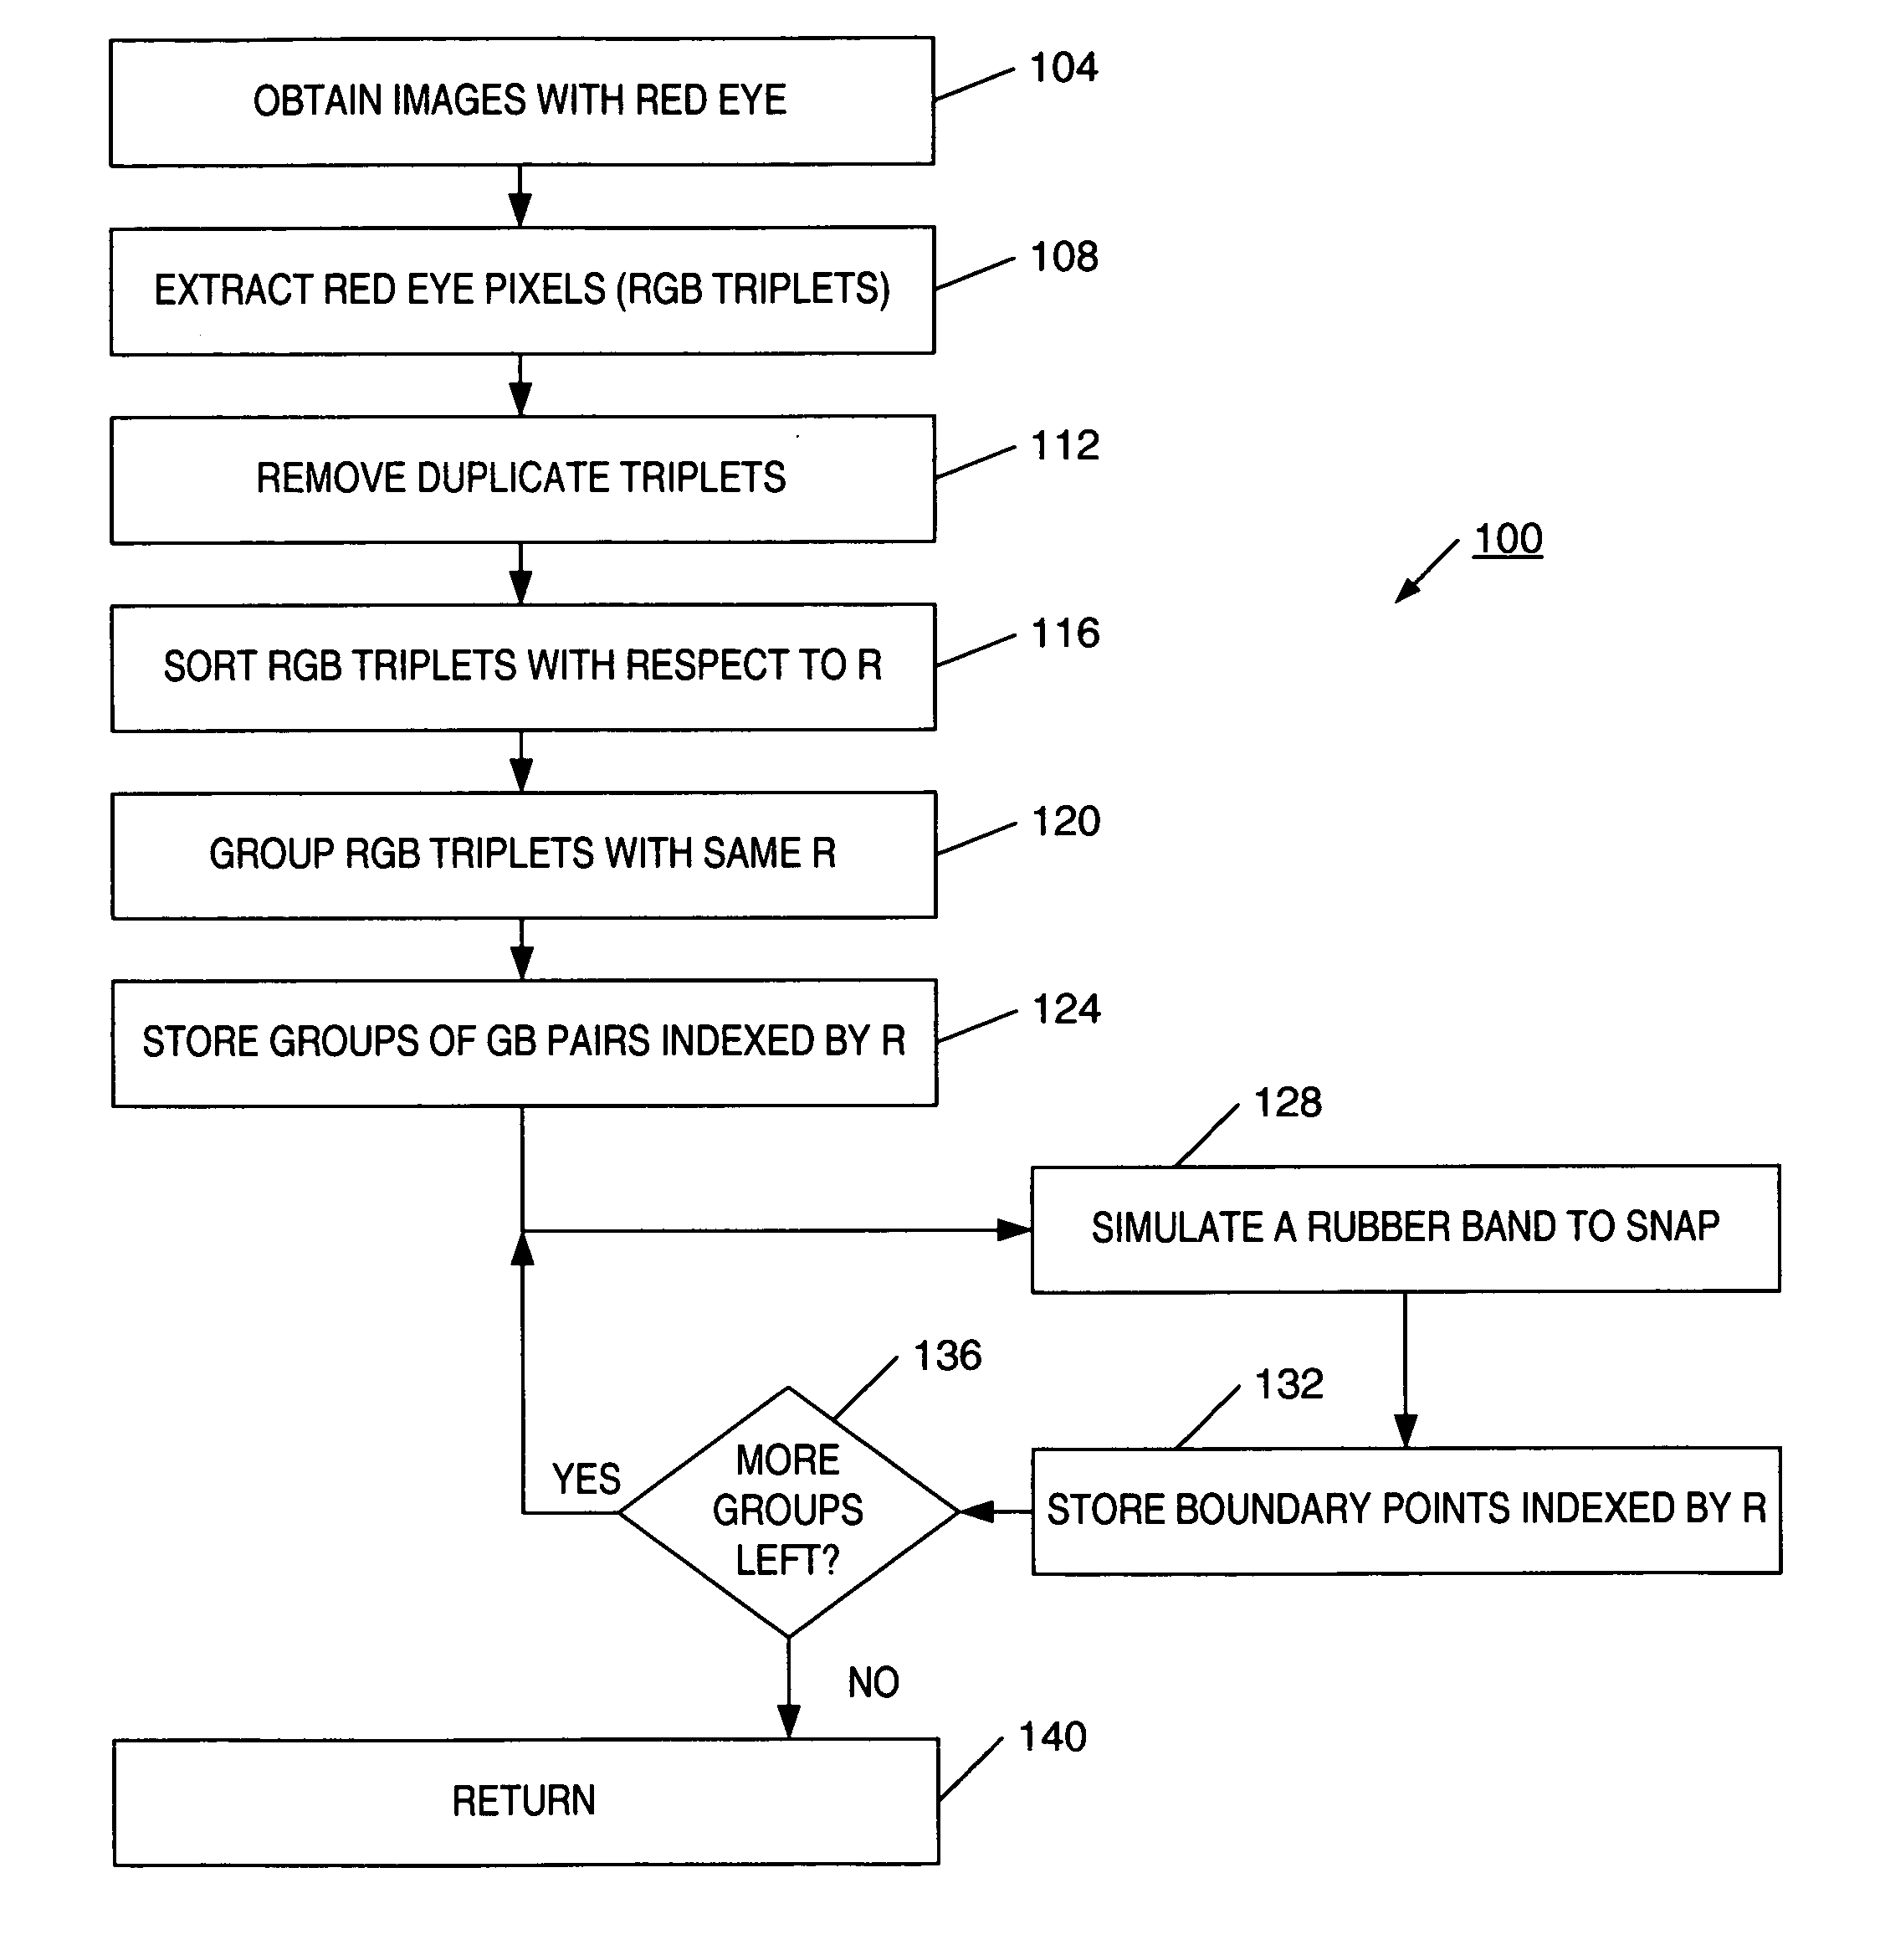 Red eye reduction apparatus and method